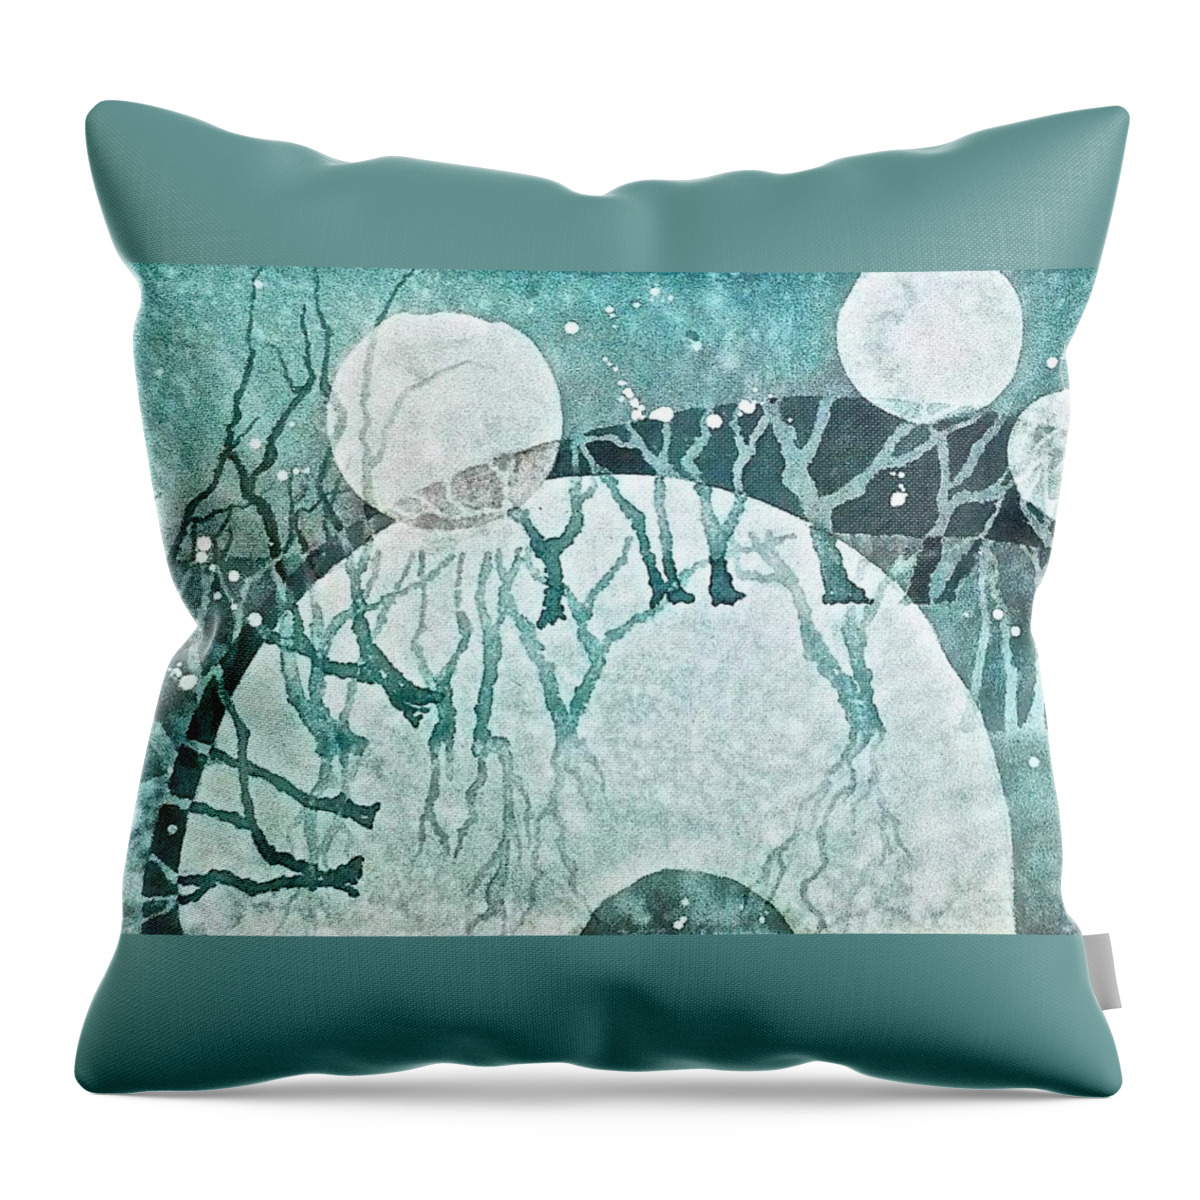 Watercolor Throw Pillow featuring the painting Moon Shadows by Carolyn Rosenberger